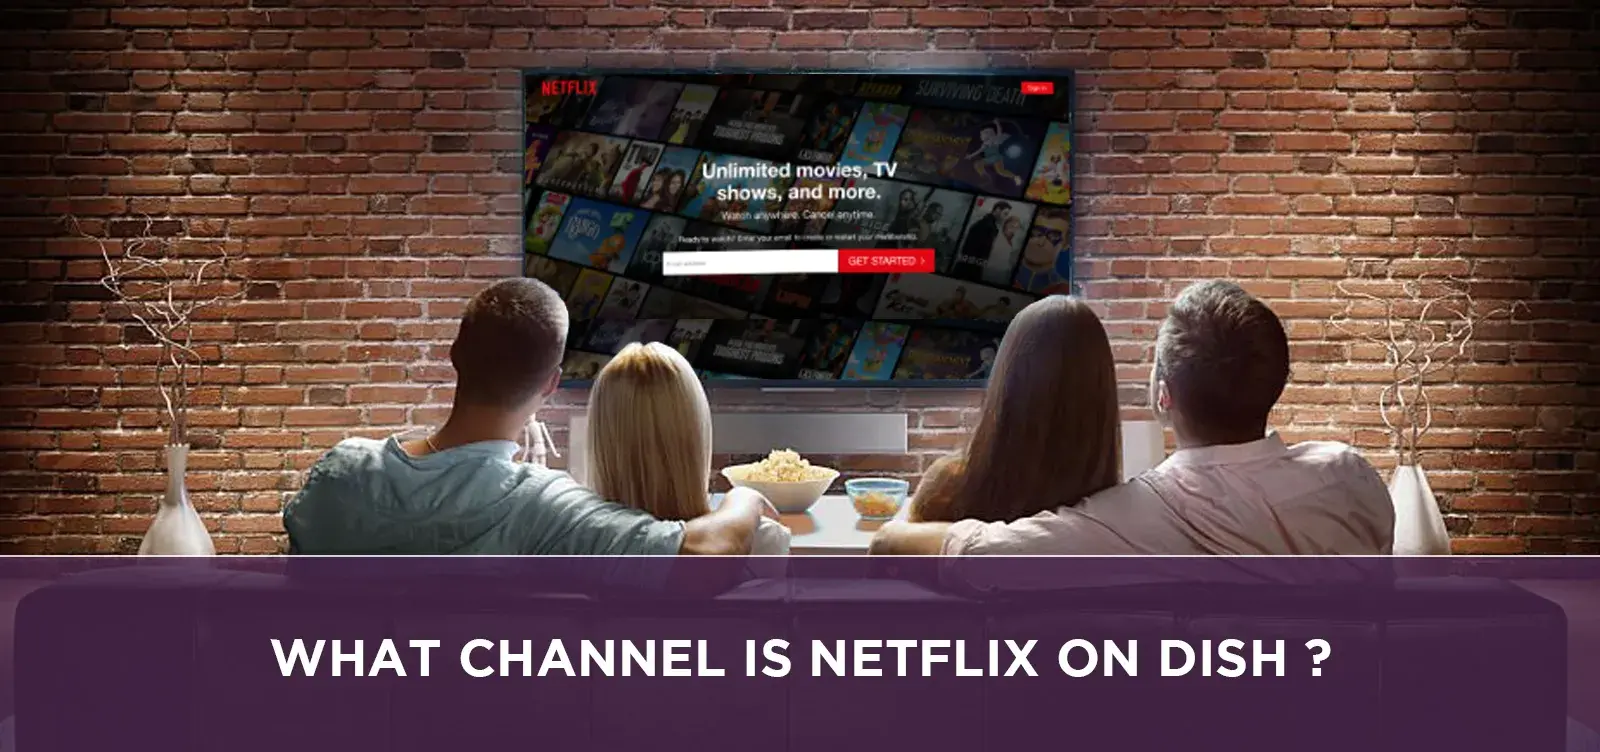 What channel is Netflix on Dish?